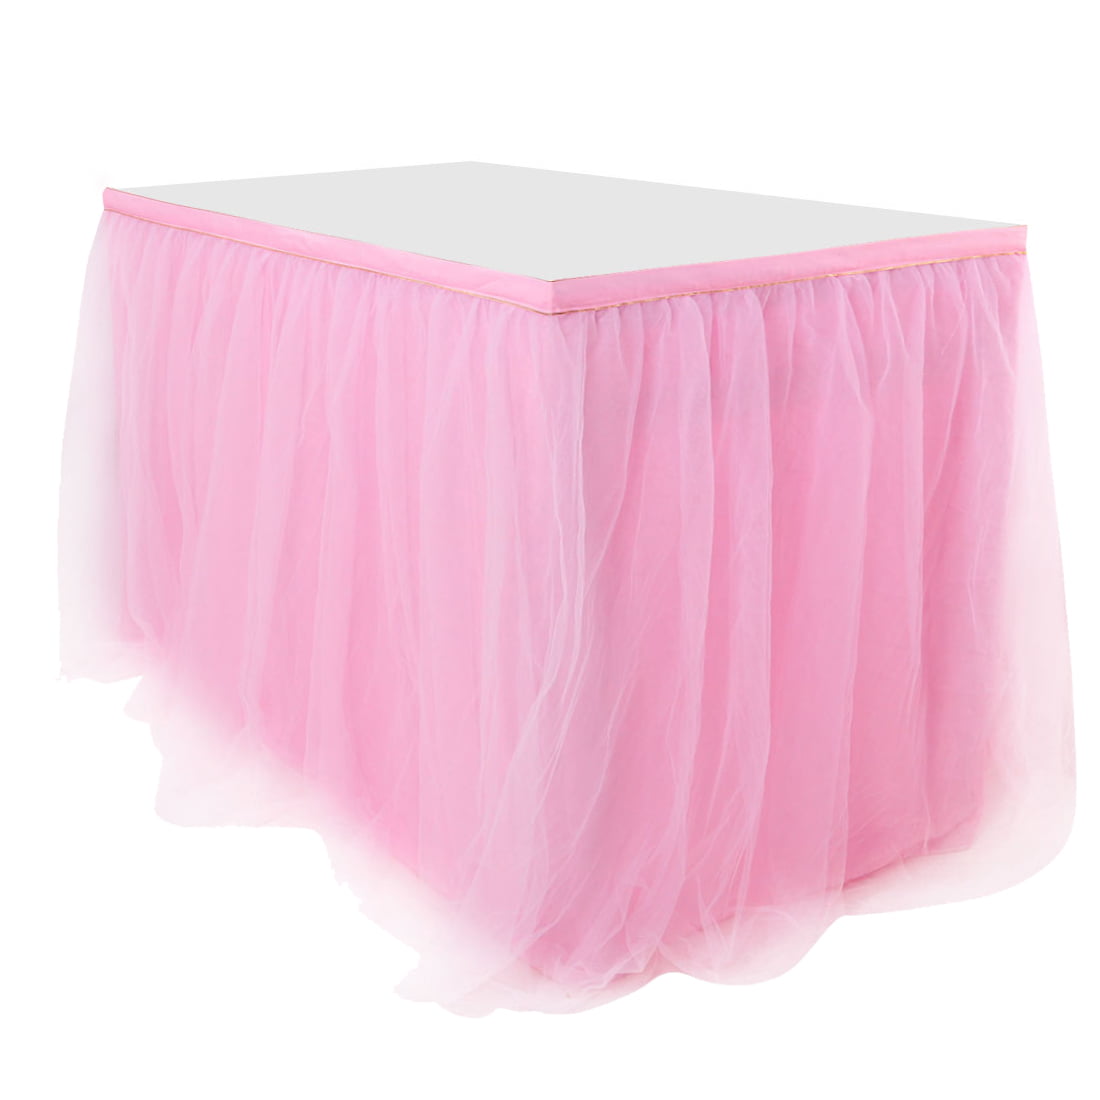 L 6 *H 30in, Pink HBBMagic High-end Gold Blrim 3 Layer Mesh Fluffy Tutu Talbe Skirt Tulle Tableware Tulle Table Cloth For Party,Wedding,Birthday Party&Home Decoration ft 